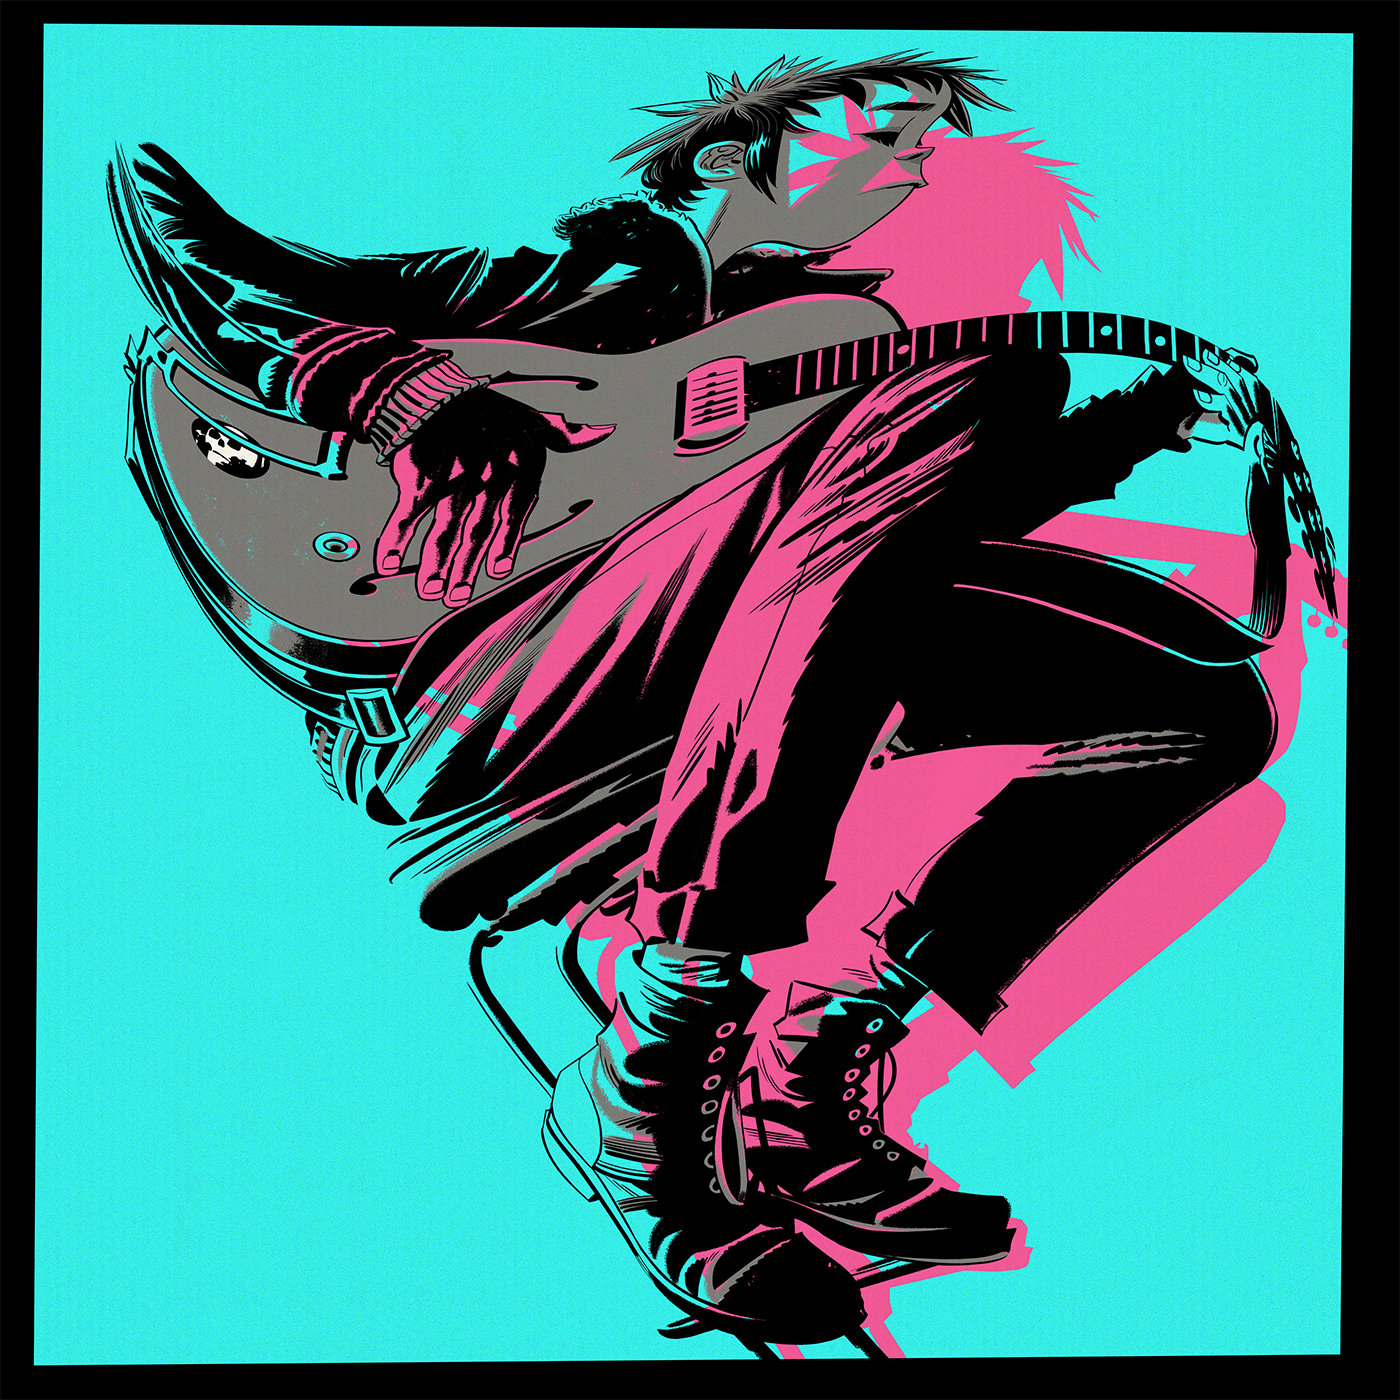 GORILLAZ: New Studio Album The Now Now Out June 29th on Warner Bros. Records